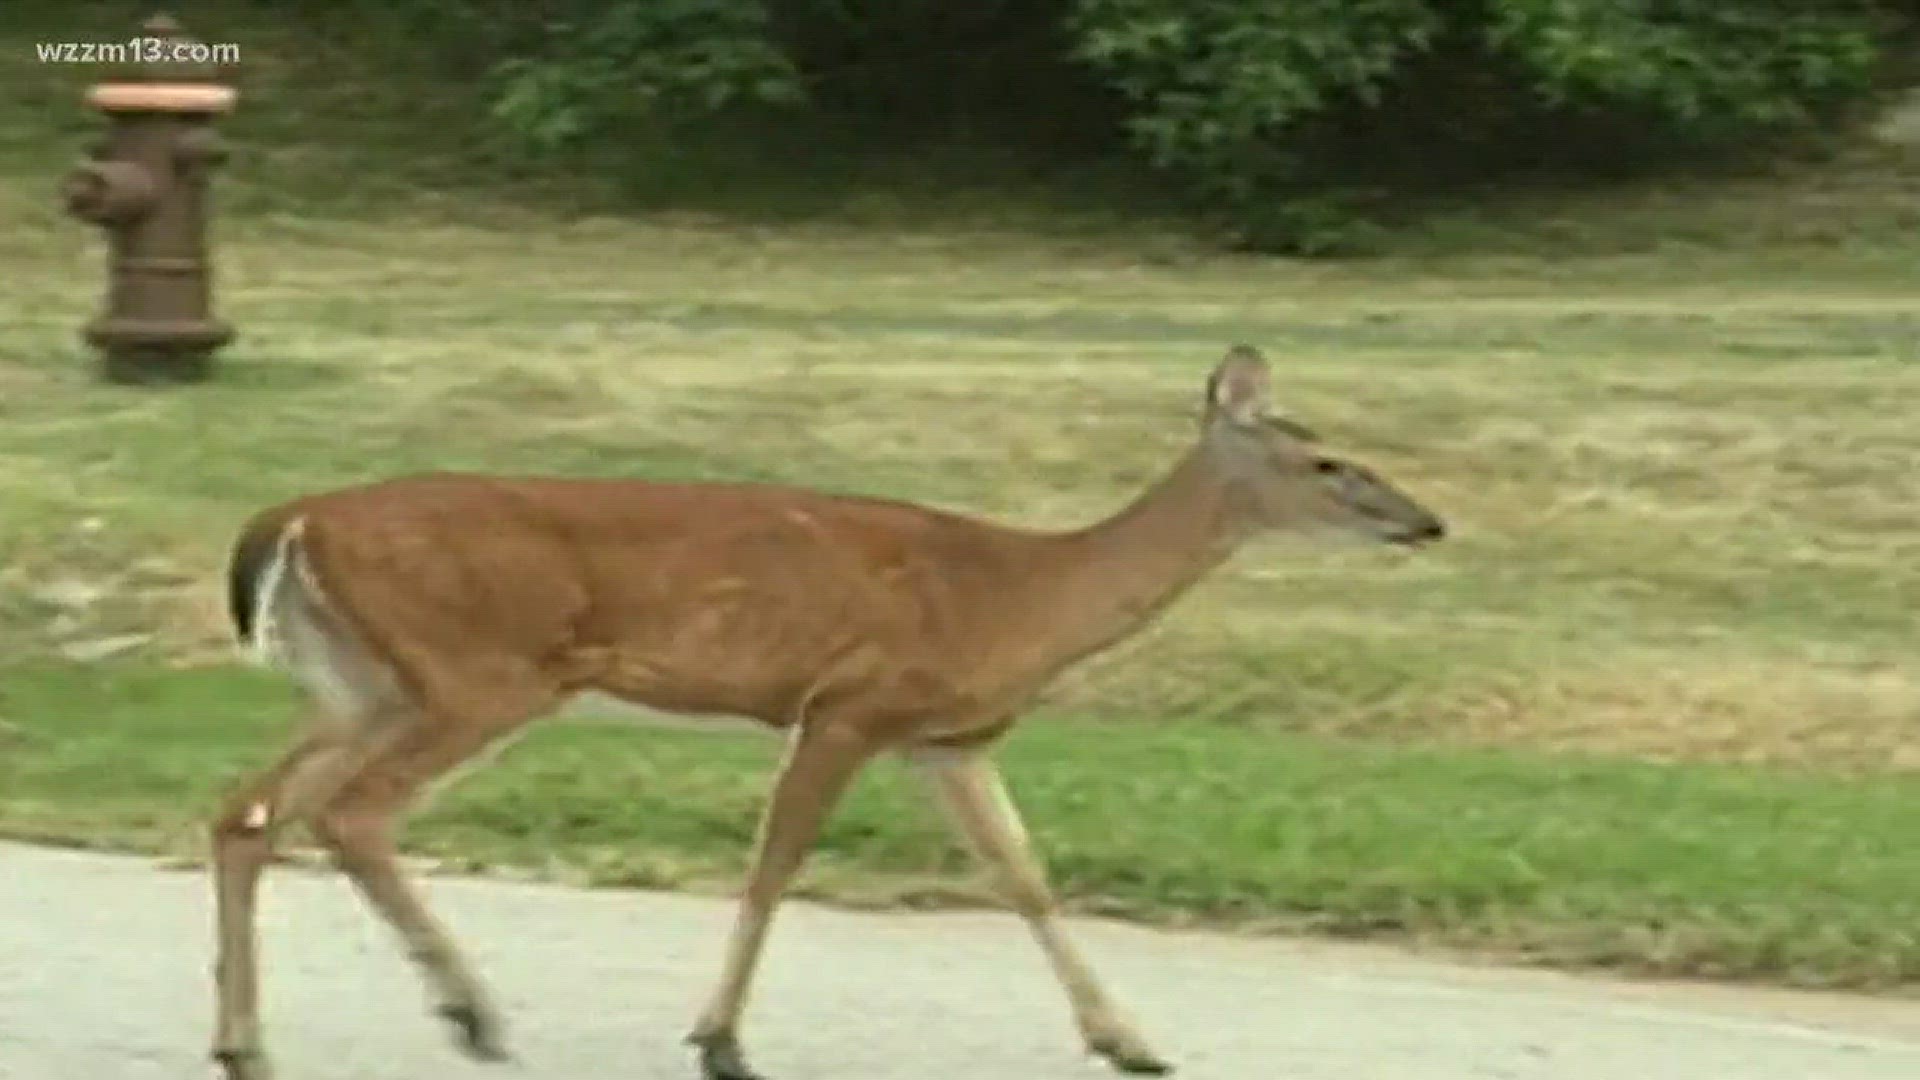 DNR warns of Chronic Wasting Disease which threatens state deer population